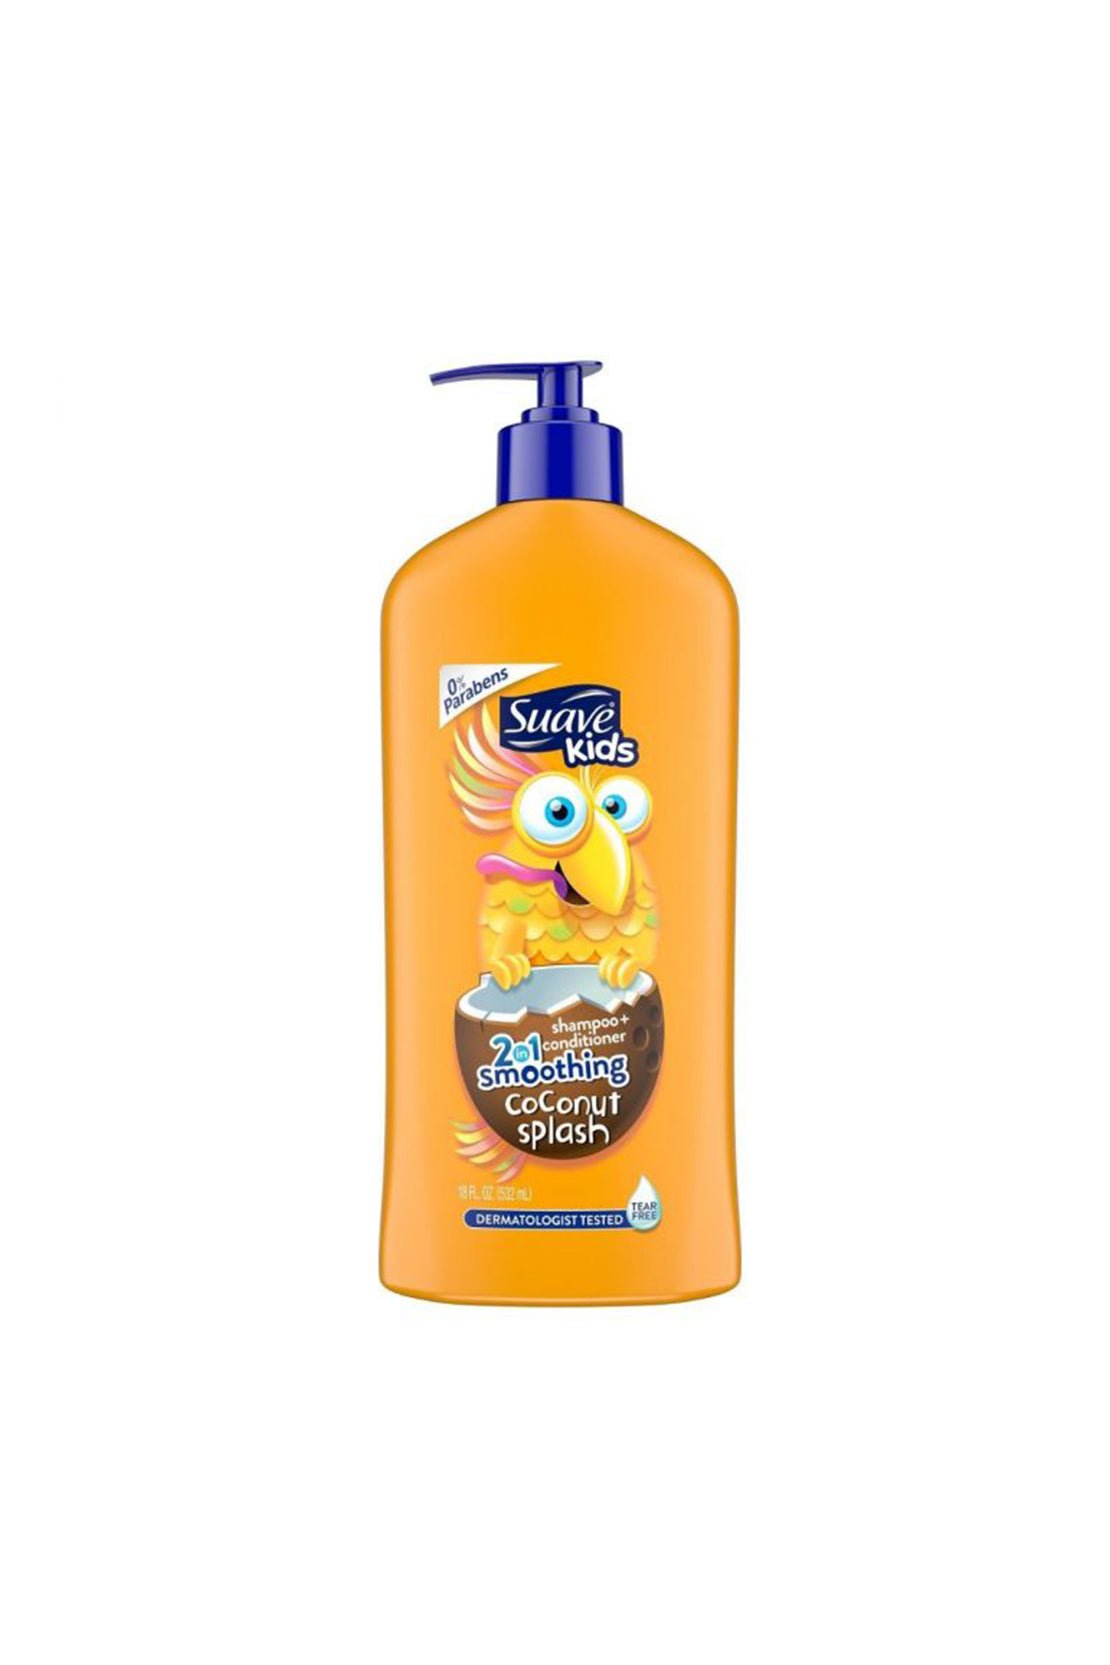 2in1 Kids Coconut Splash Smoothing Shampoo And Conditioner 532ml RIOS